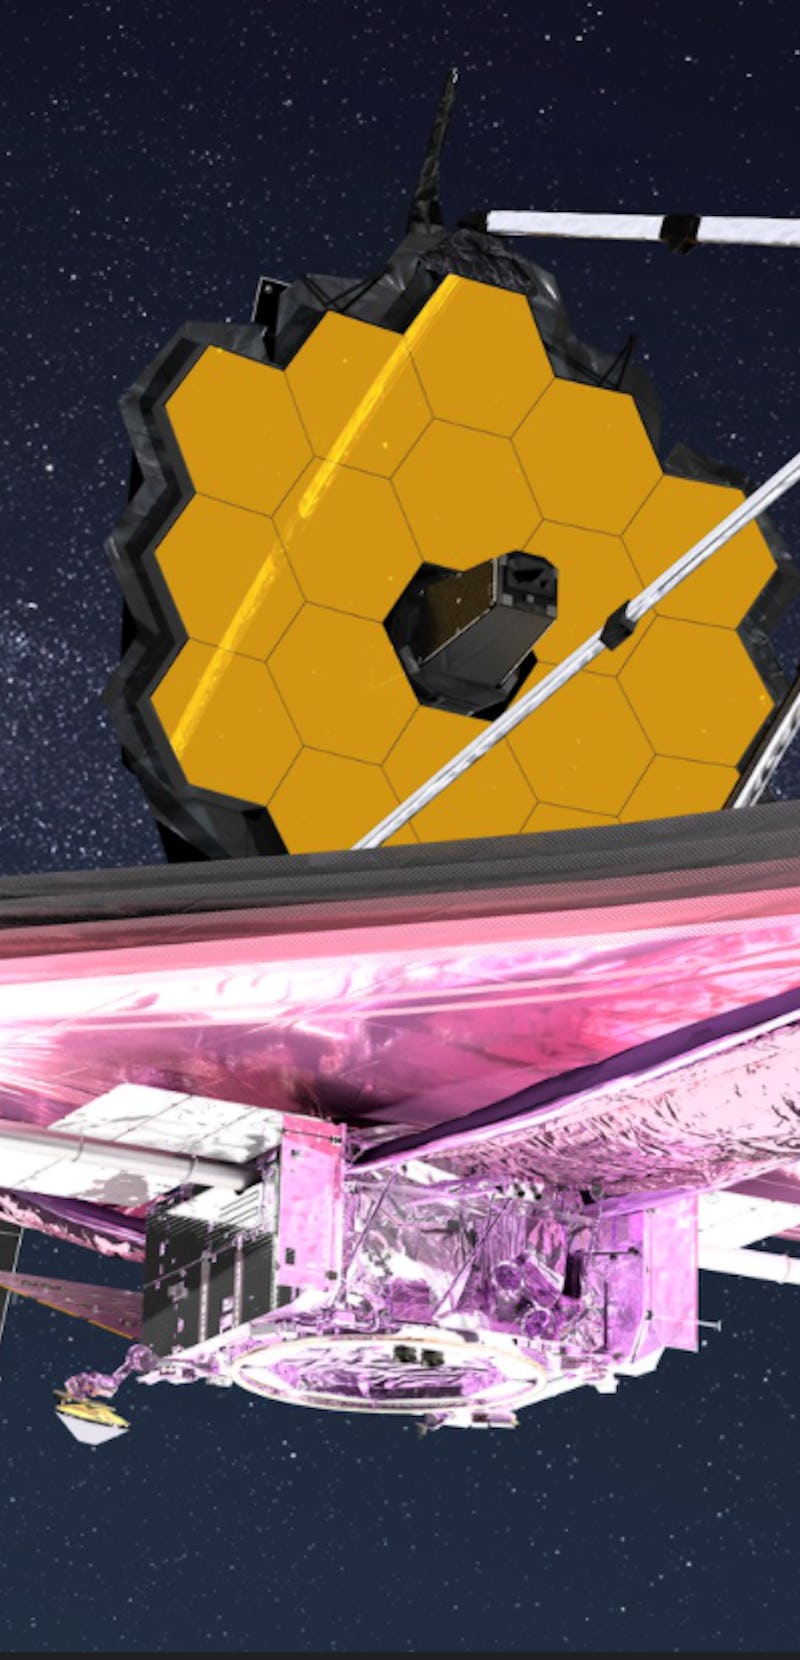 This artist’s conception of the James Webb Space Telescope in space shows 